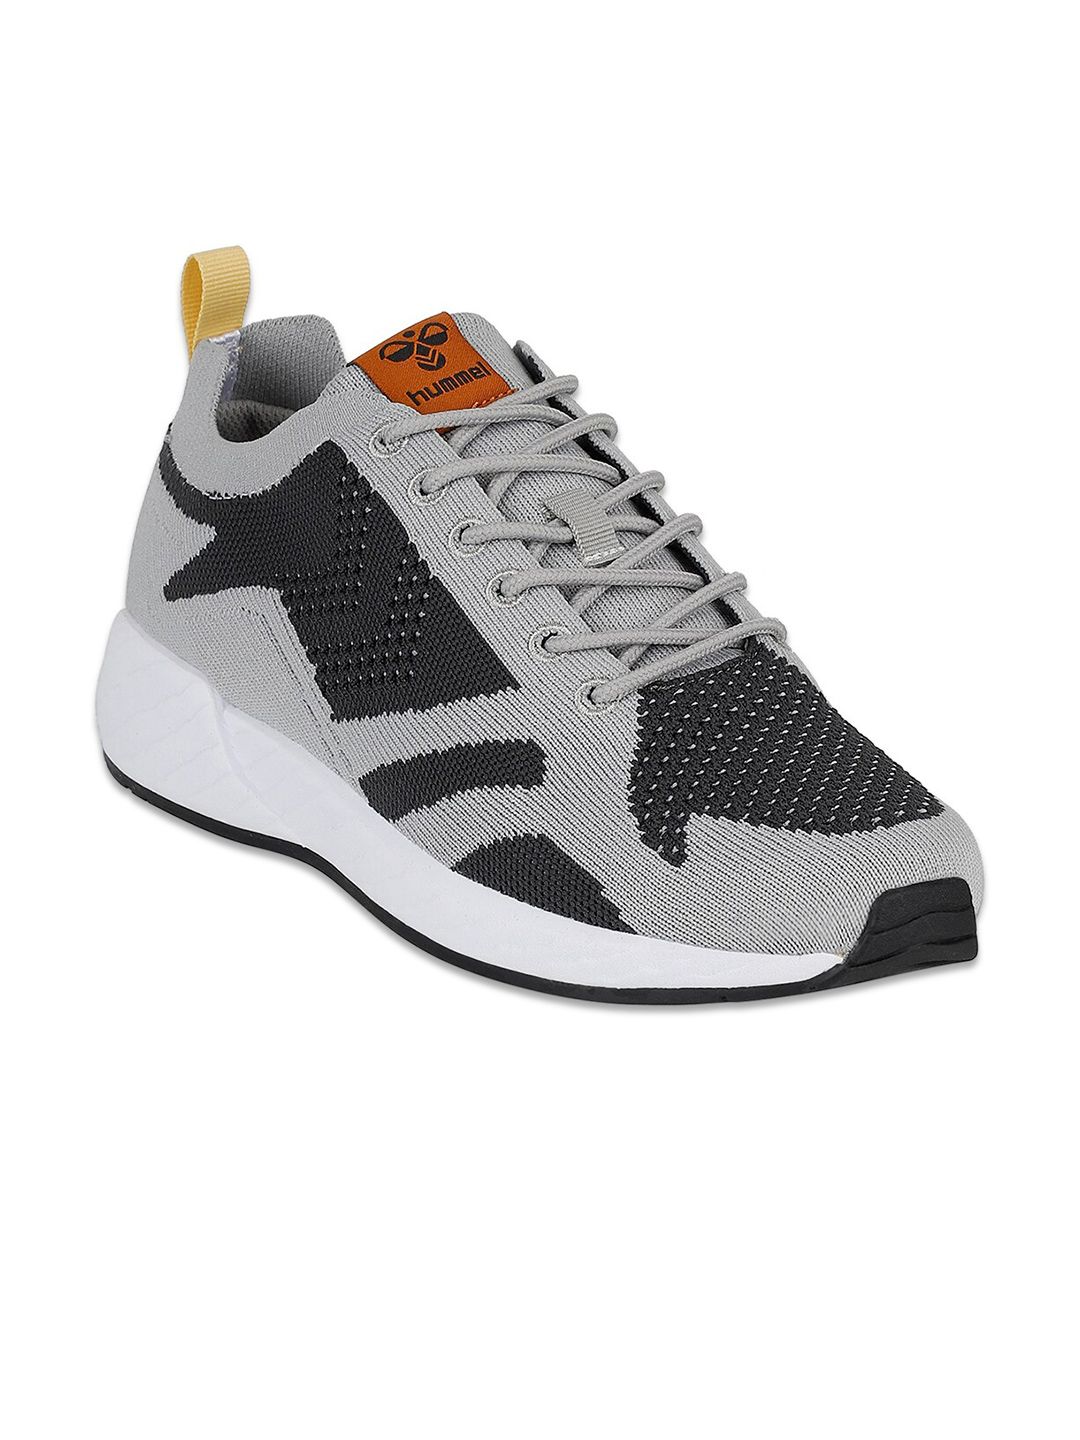 hummel Unisex Grey Textile Training or Gym Shoes Price in India